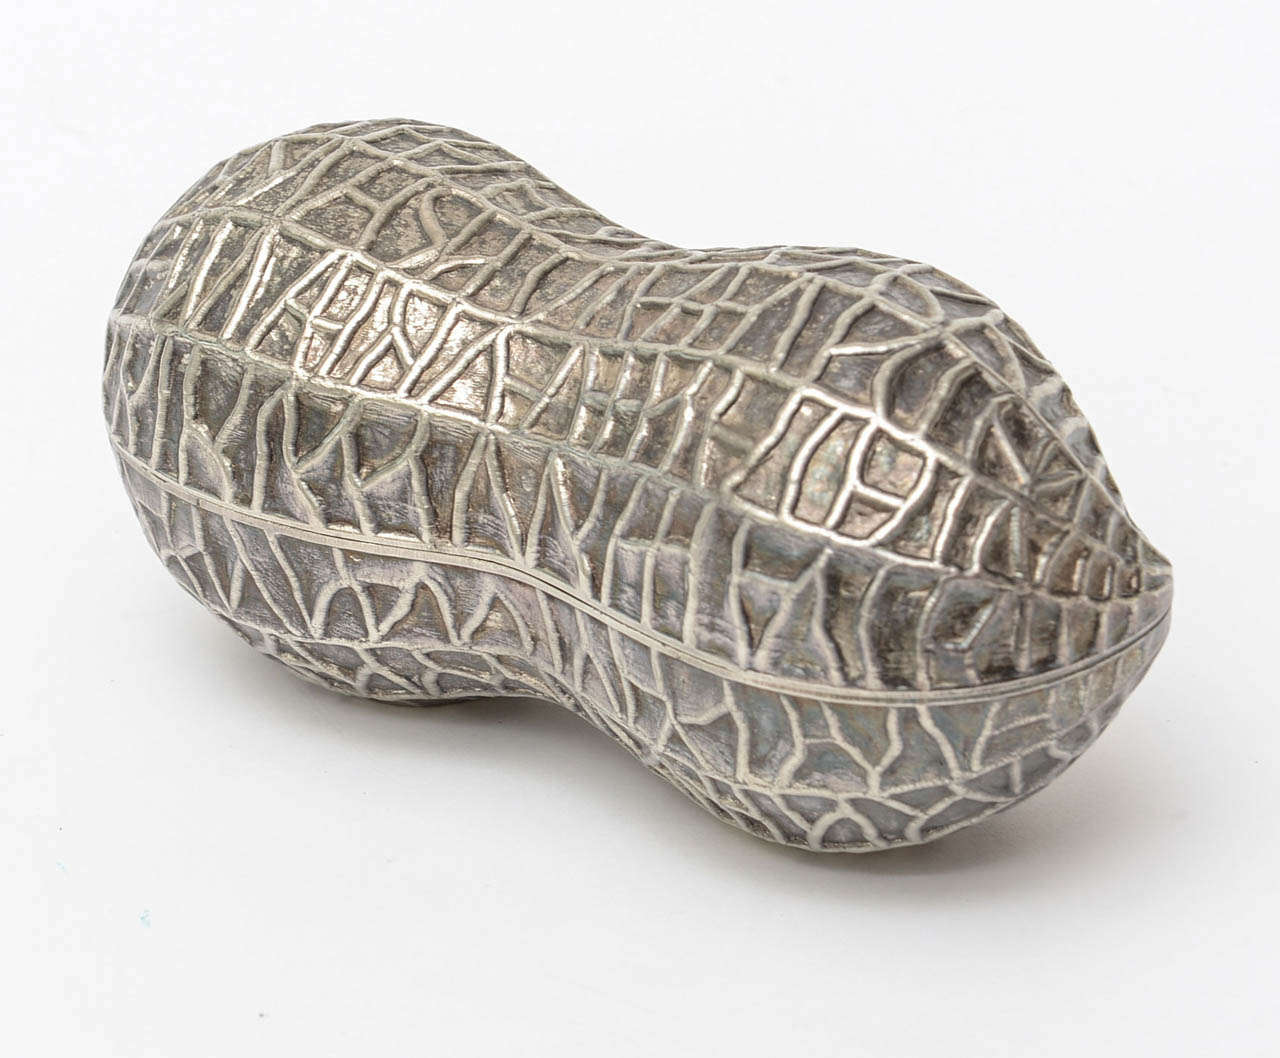 This texturalrendition of a peanut shell in 3 dimensional form called 